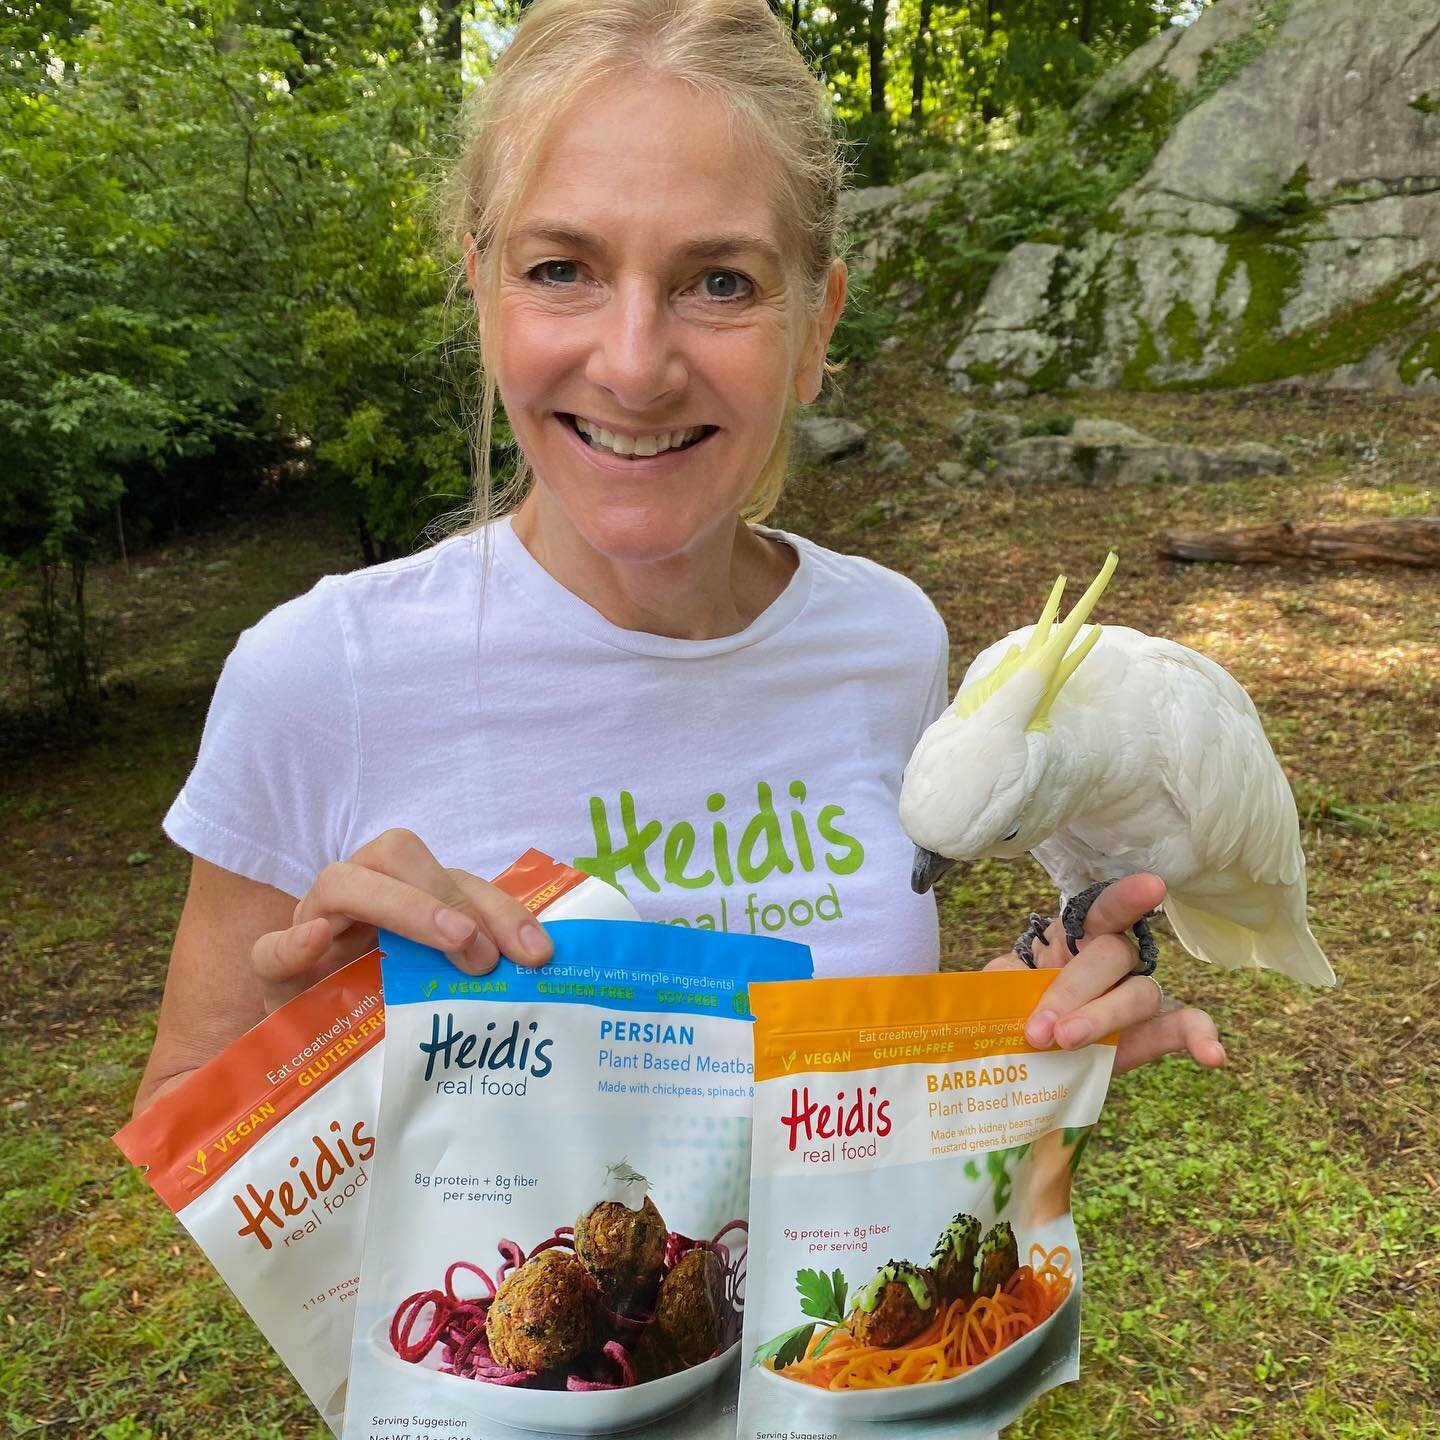 Happy Friday, indeed! Tell us: which flavor of @heidisrealfood are you feasting on this weekend?